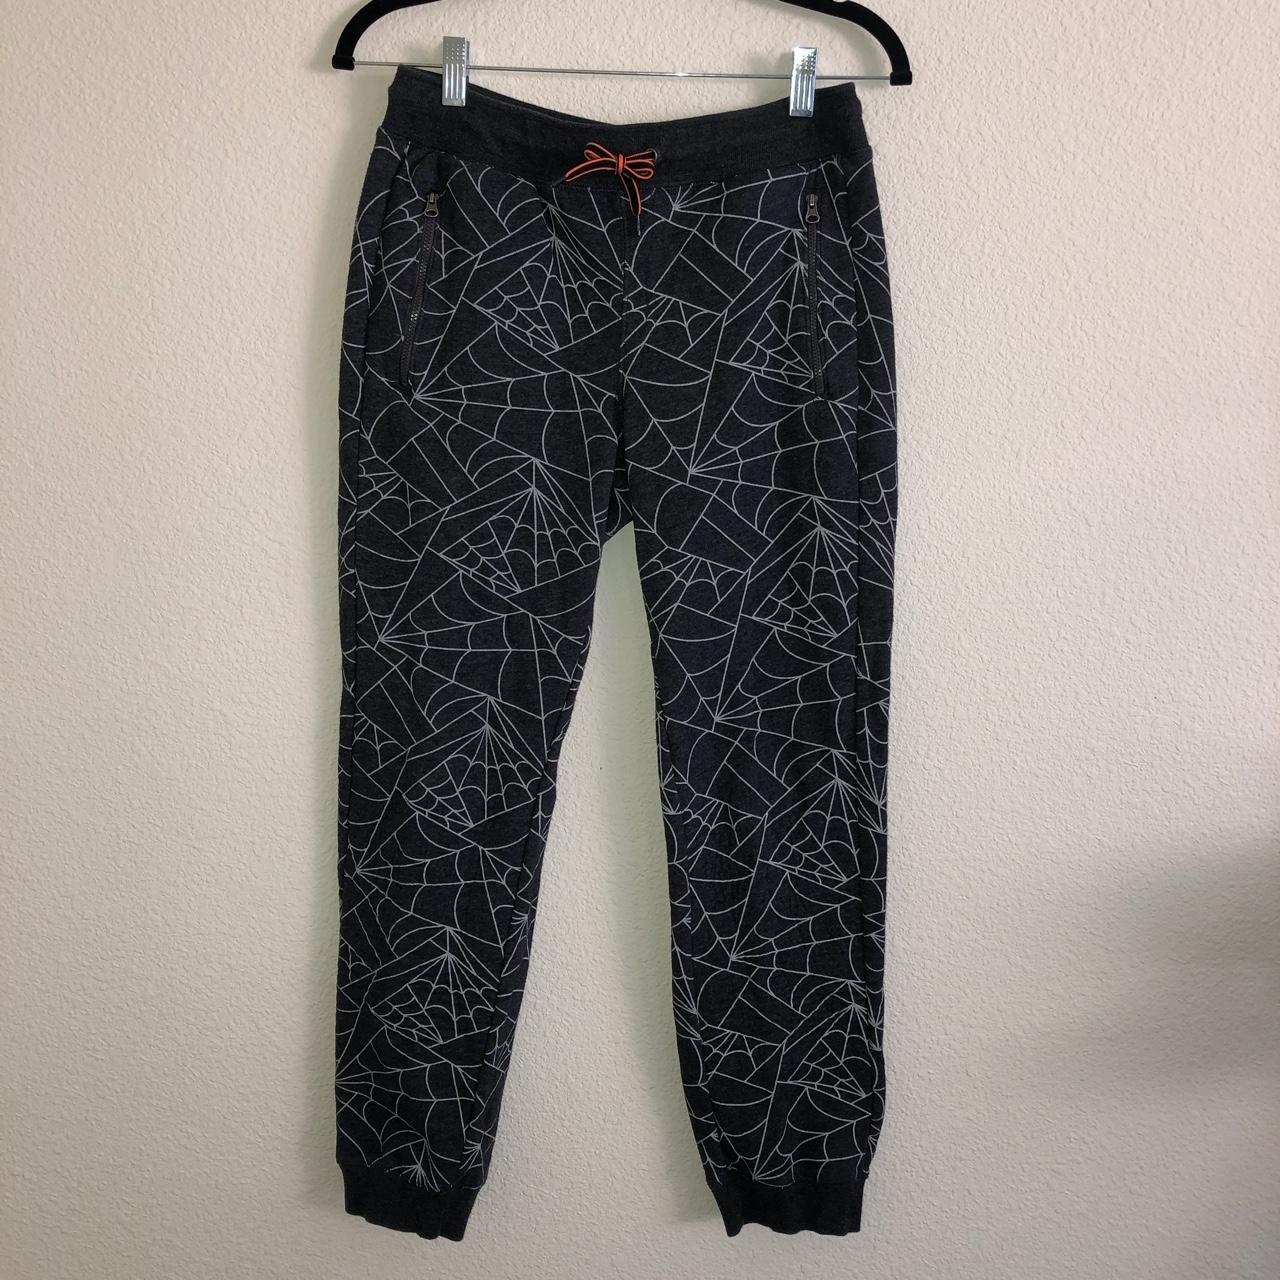 Spiderweb Printed Sweatpants 🕷 🕸 Features two front... - Depop